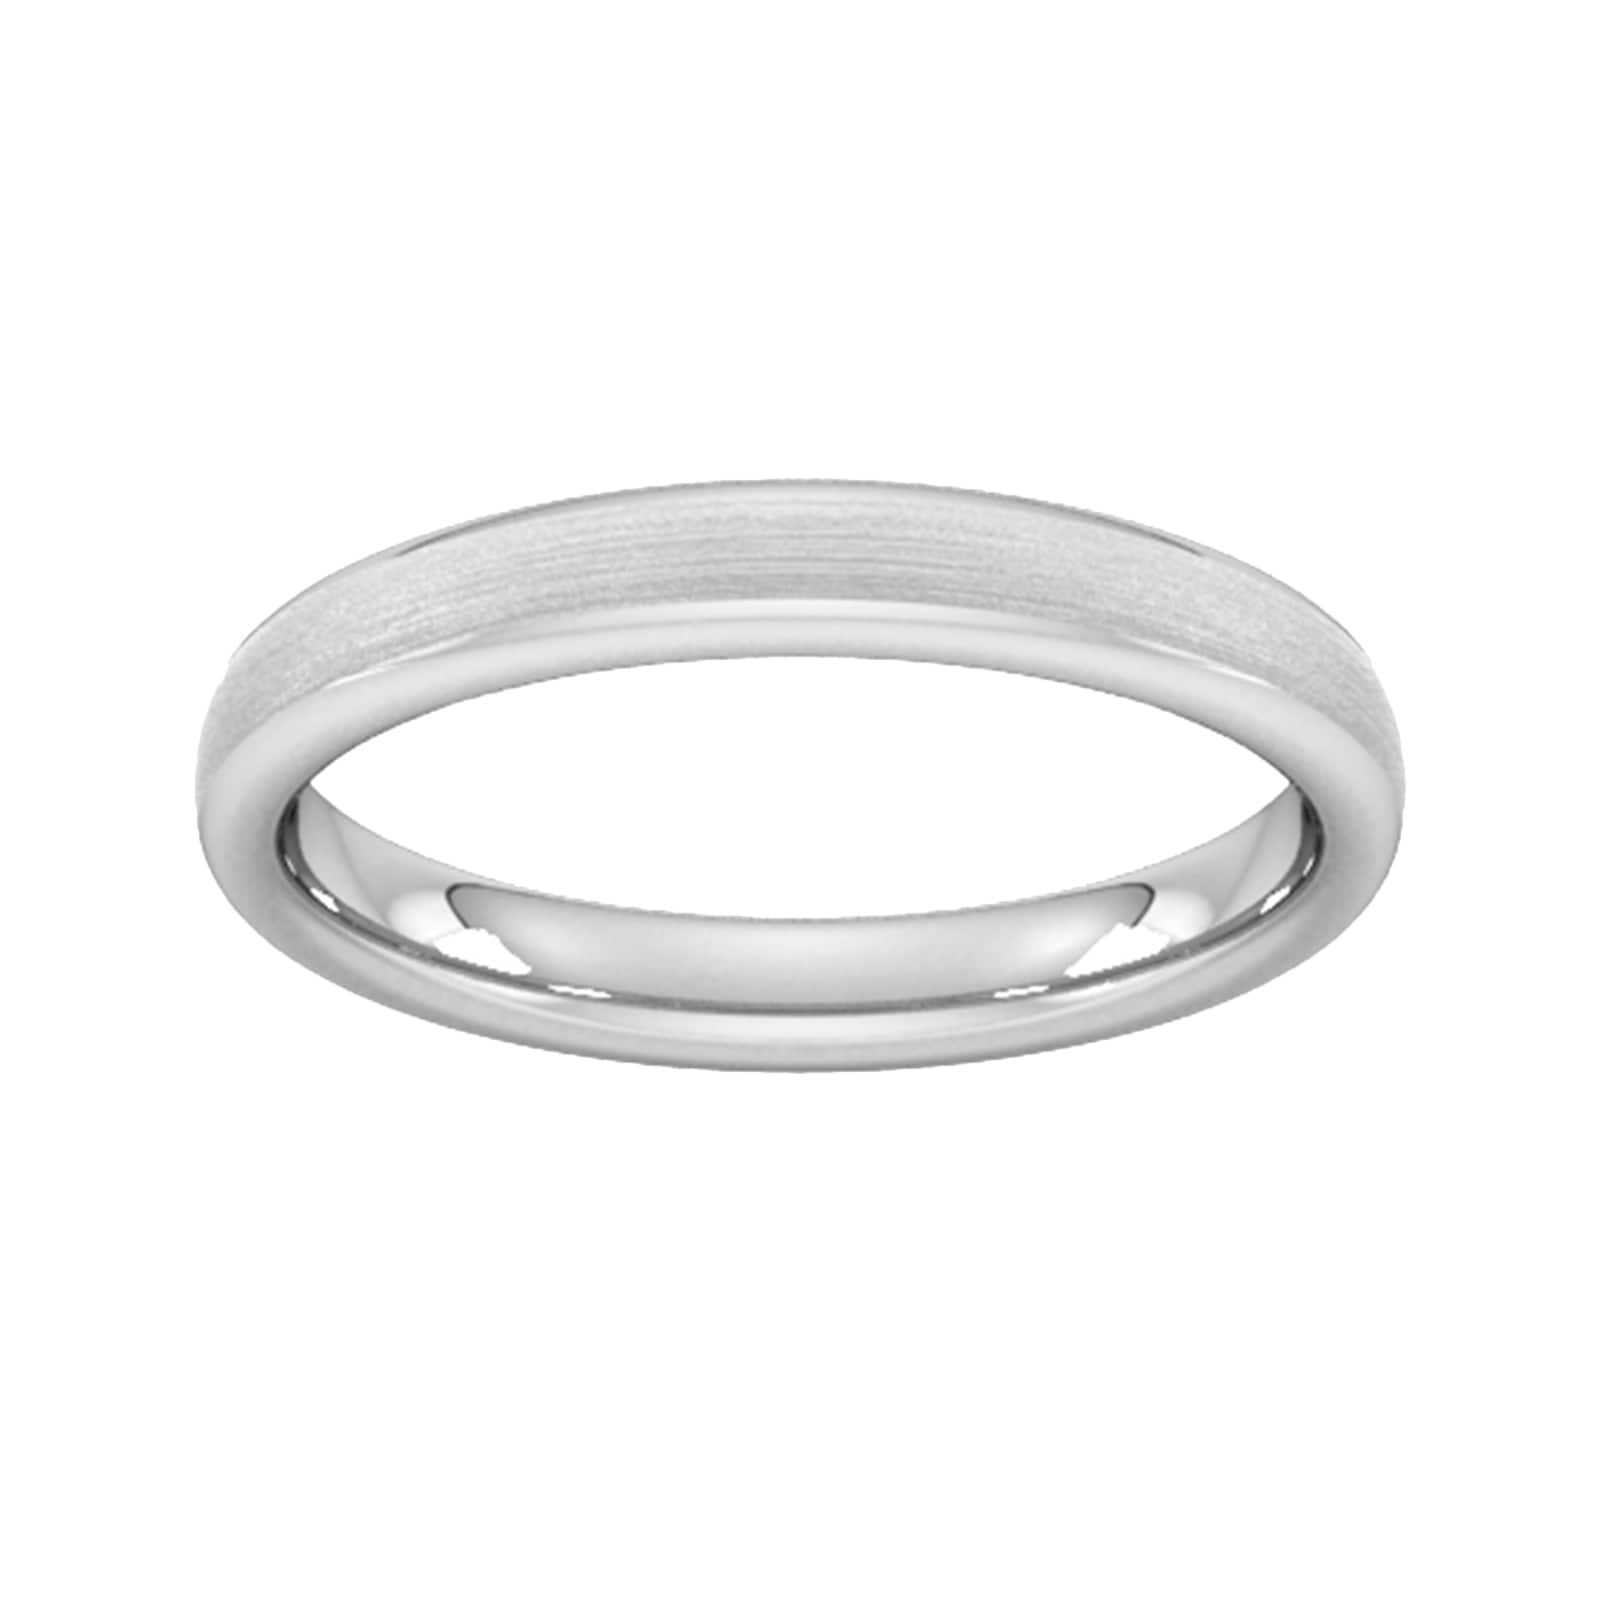 3mm Traditional Court Heavy Matt Finished Wedding Ring In 18 Carat White Gold - Ring Size W